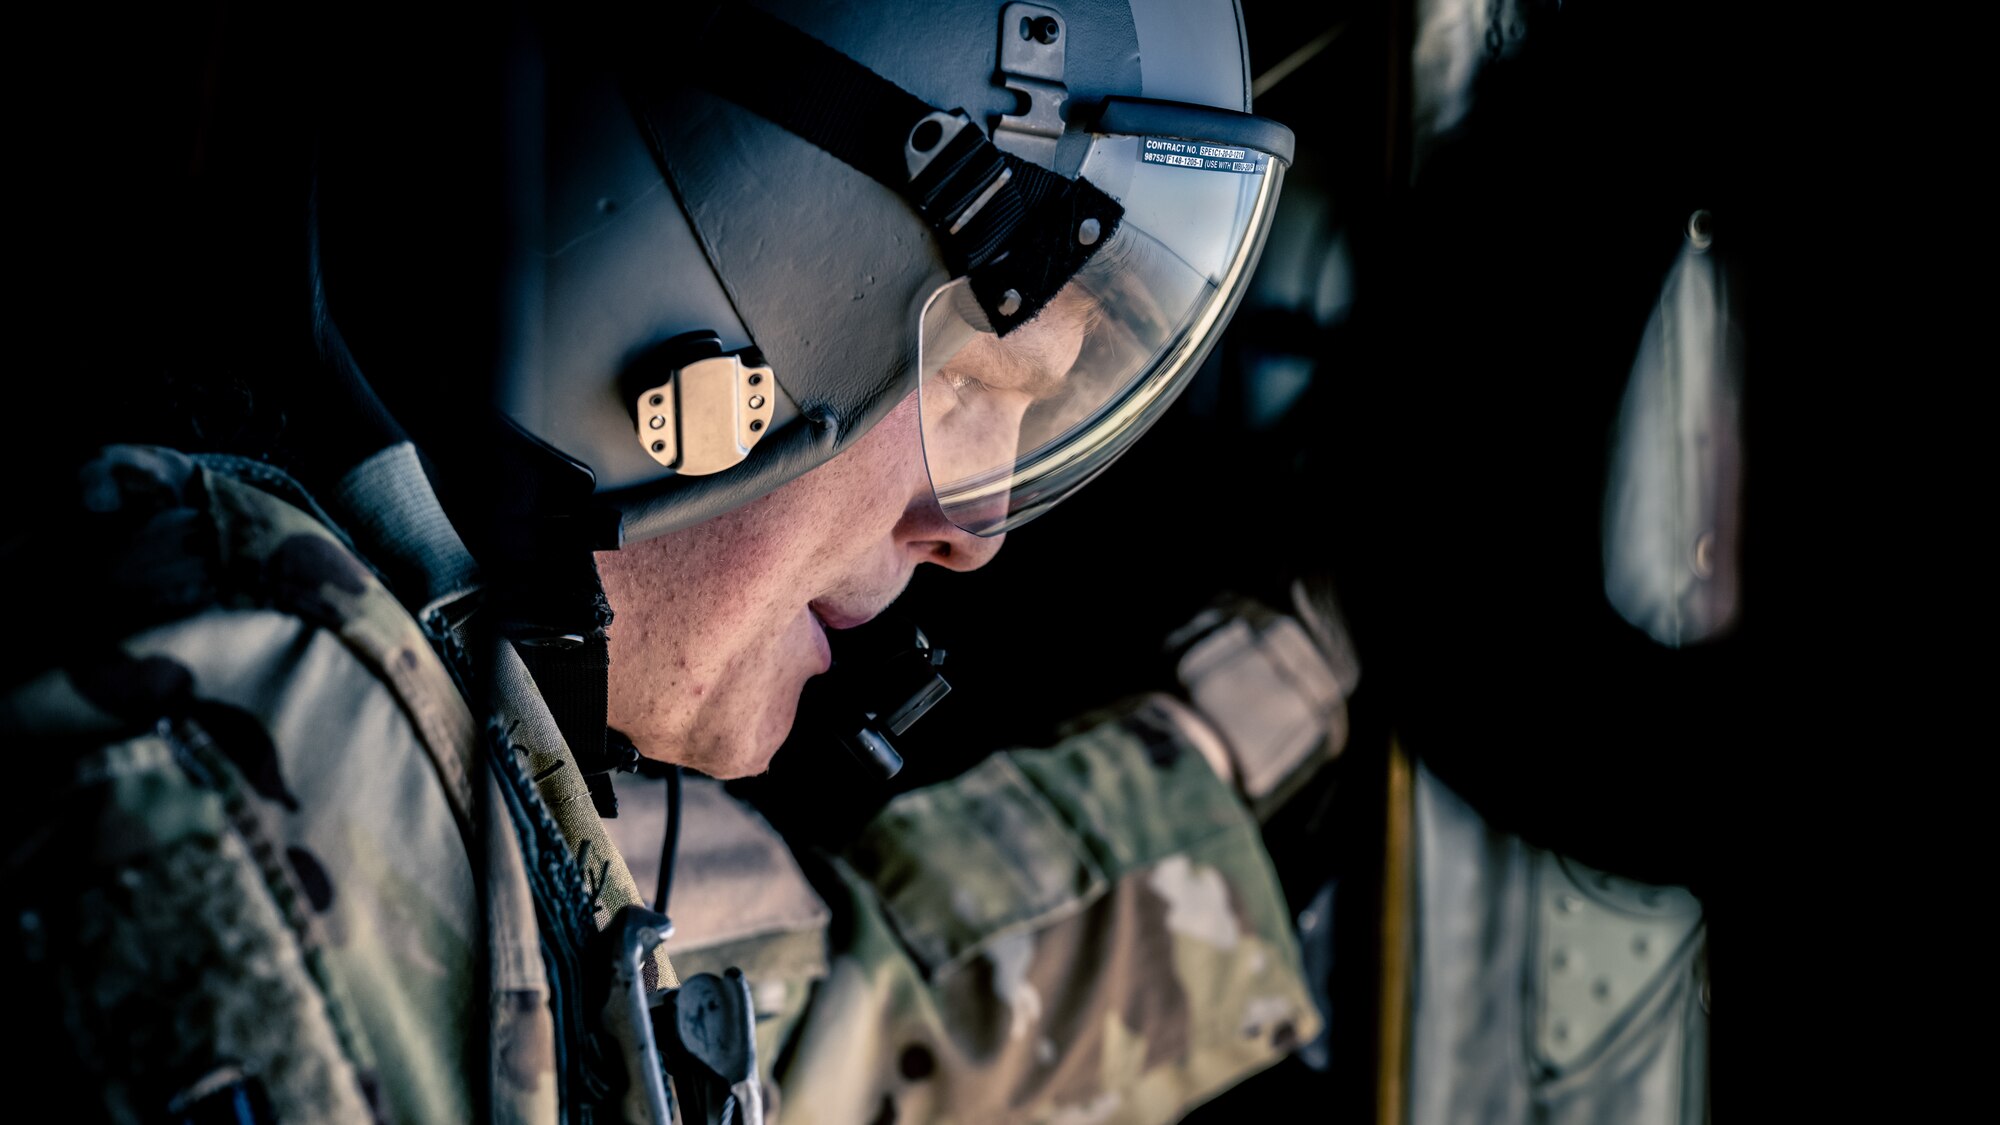 A U.S. Air Force loadmaster assigned to the 61st Expeditionary Airlift Squadron at the 386th Air Expeditionary Wing performs a safety check on the exit of a C-130J Super Hercules during an airborne operation over Egypt in support of exercise Bright Star 23, Sept. 7, 2023. Bright Star 23 is a multilateral U.S. Central Command exercise held with the Arab Republic of Egypt across air, land, and sea domains that promotes and enhances regional security and cooperation, and improves interoperability in irregular warfare against hybrid threat scenarios. (U.S. Air Force photo by Staff Sgt. Kevin Long)